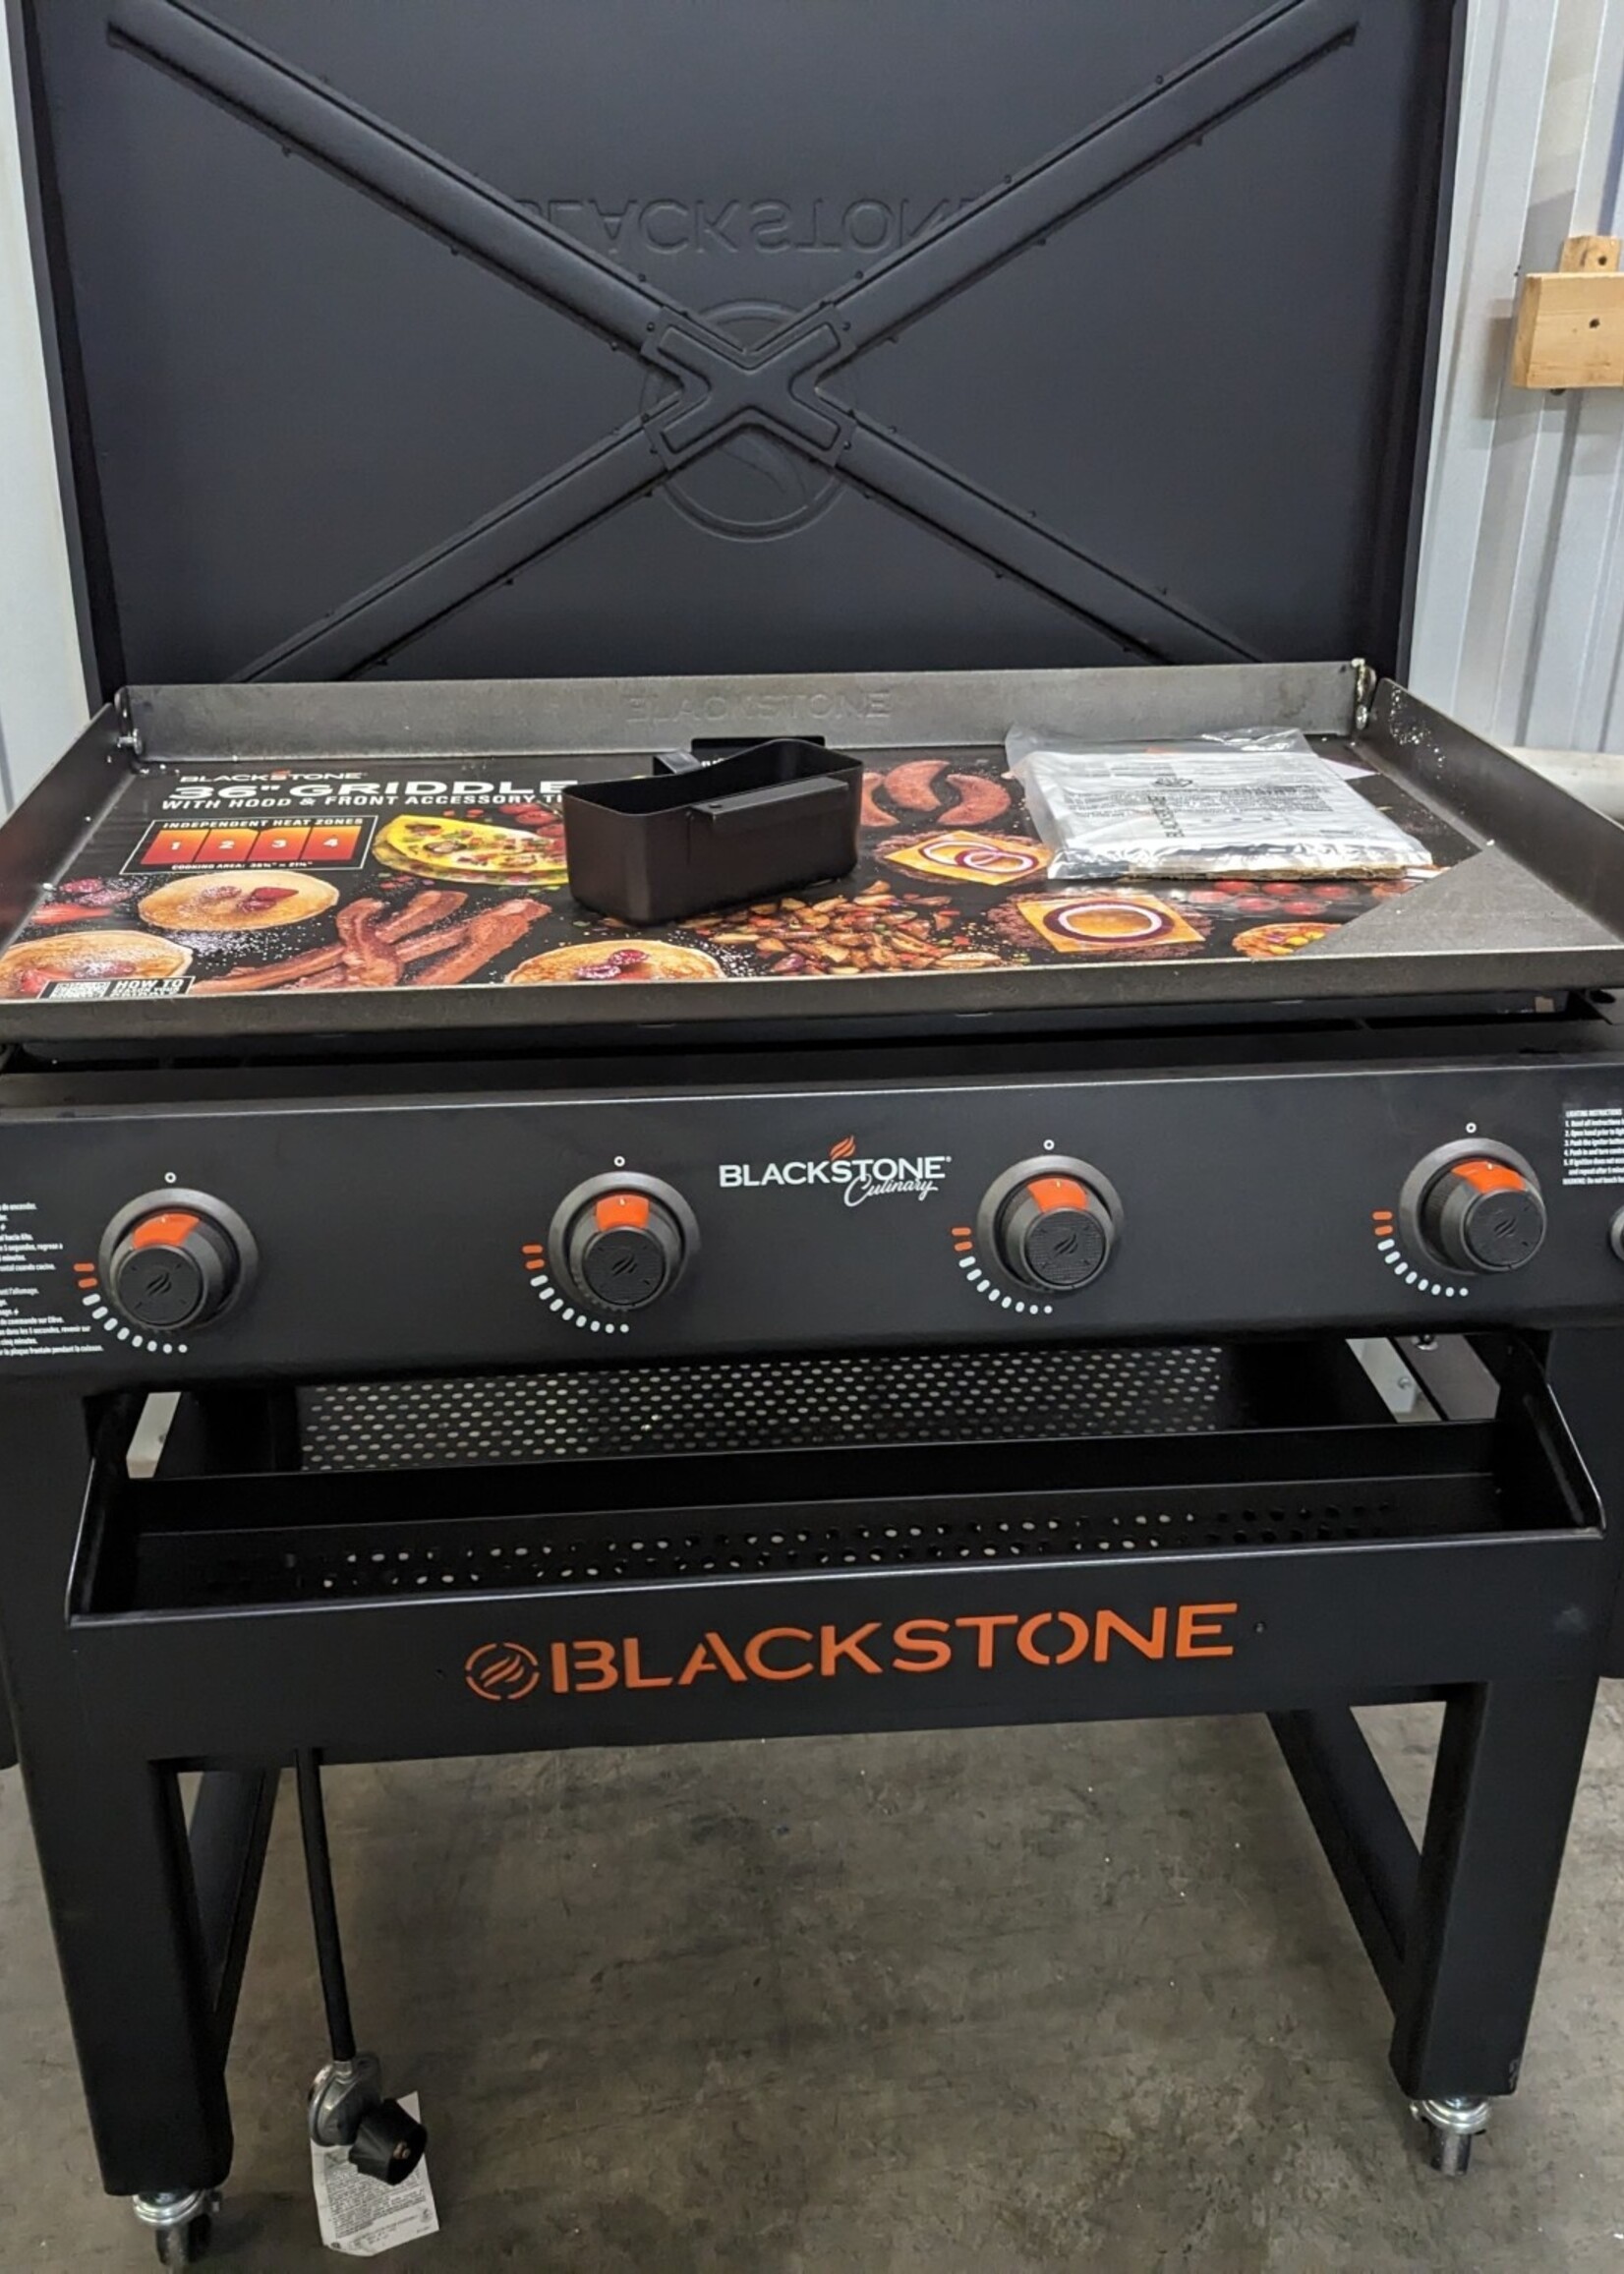 *Blackstone 2162 36-in Culinary Omnivore Griddle with Hood 4-Burner Liquid Propane Flat Top Grill